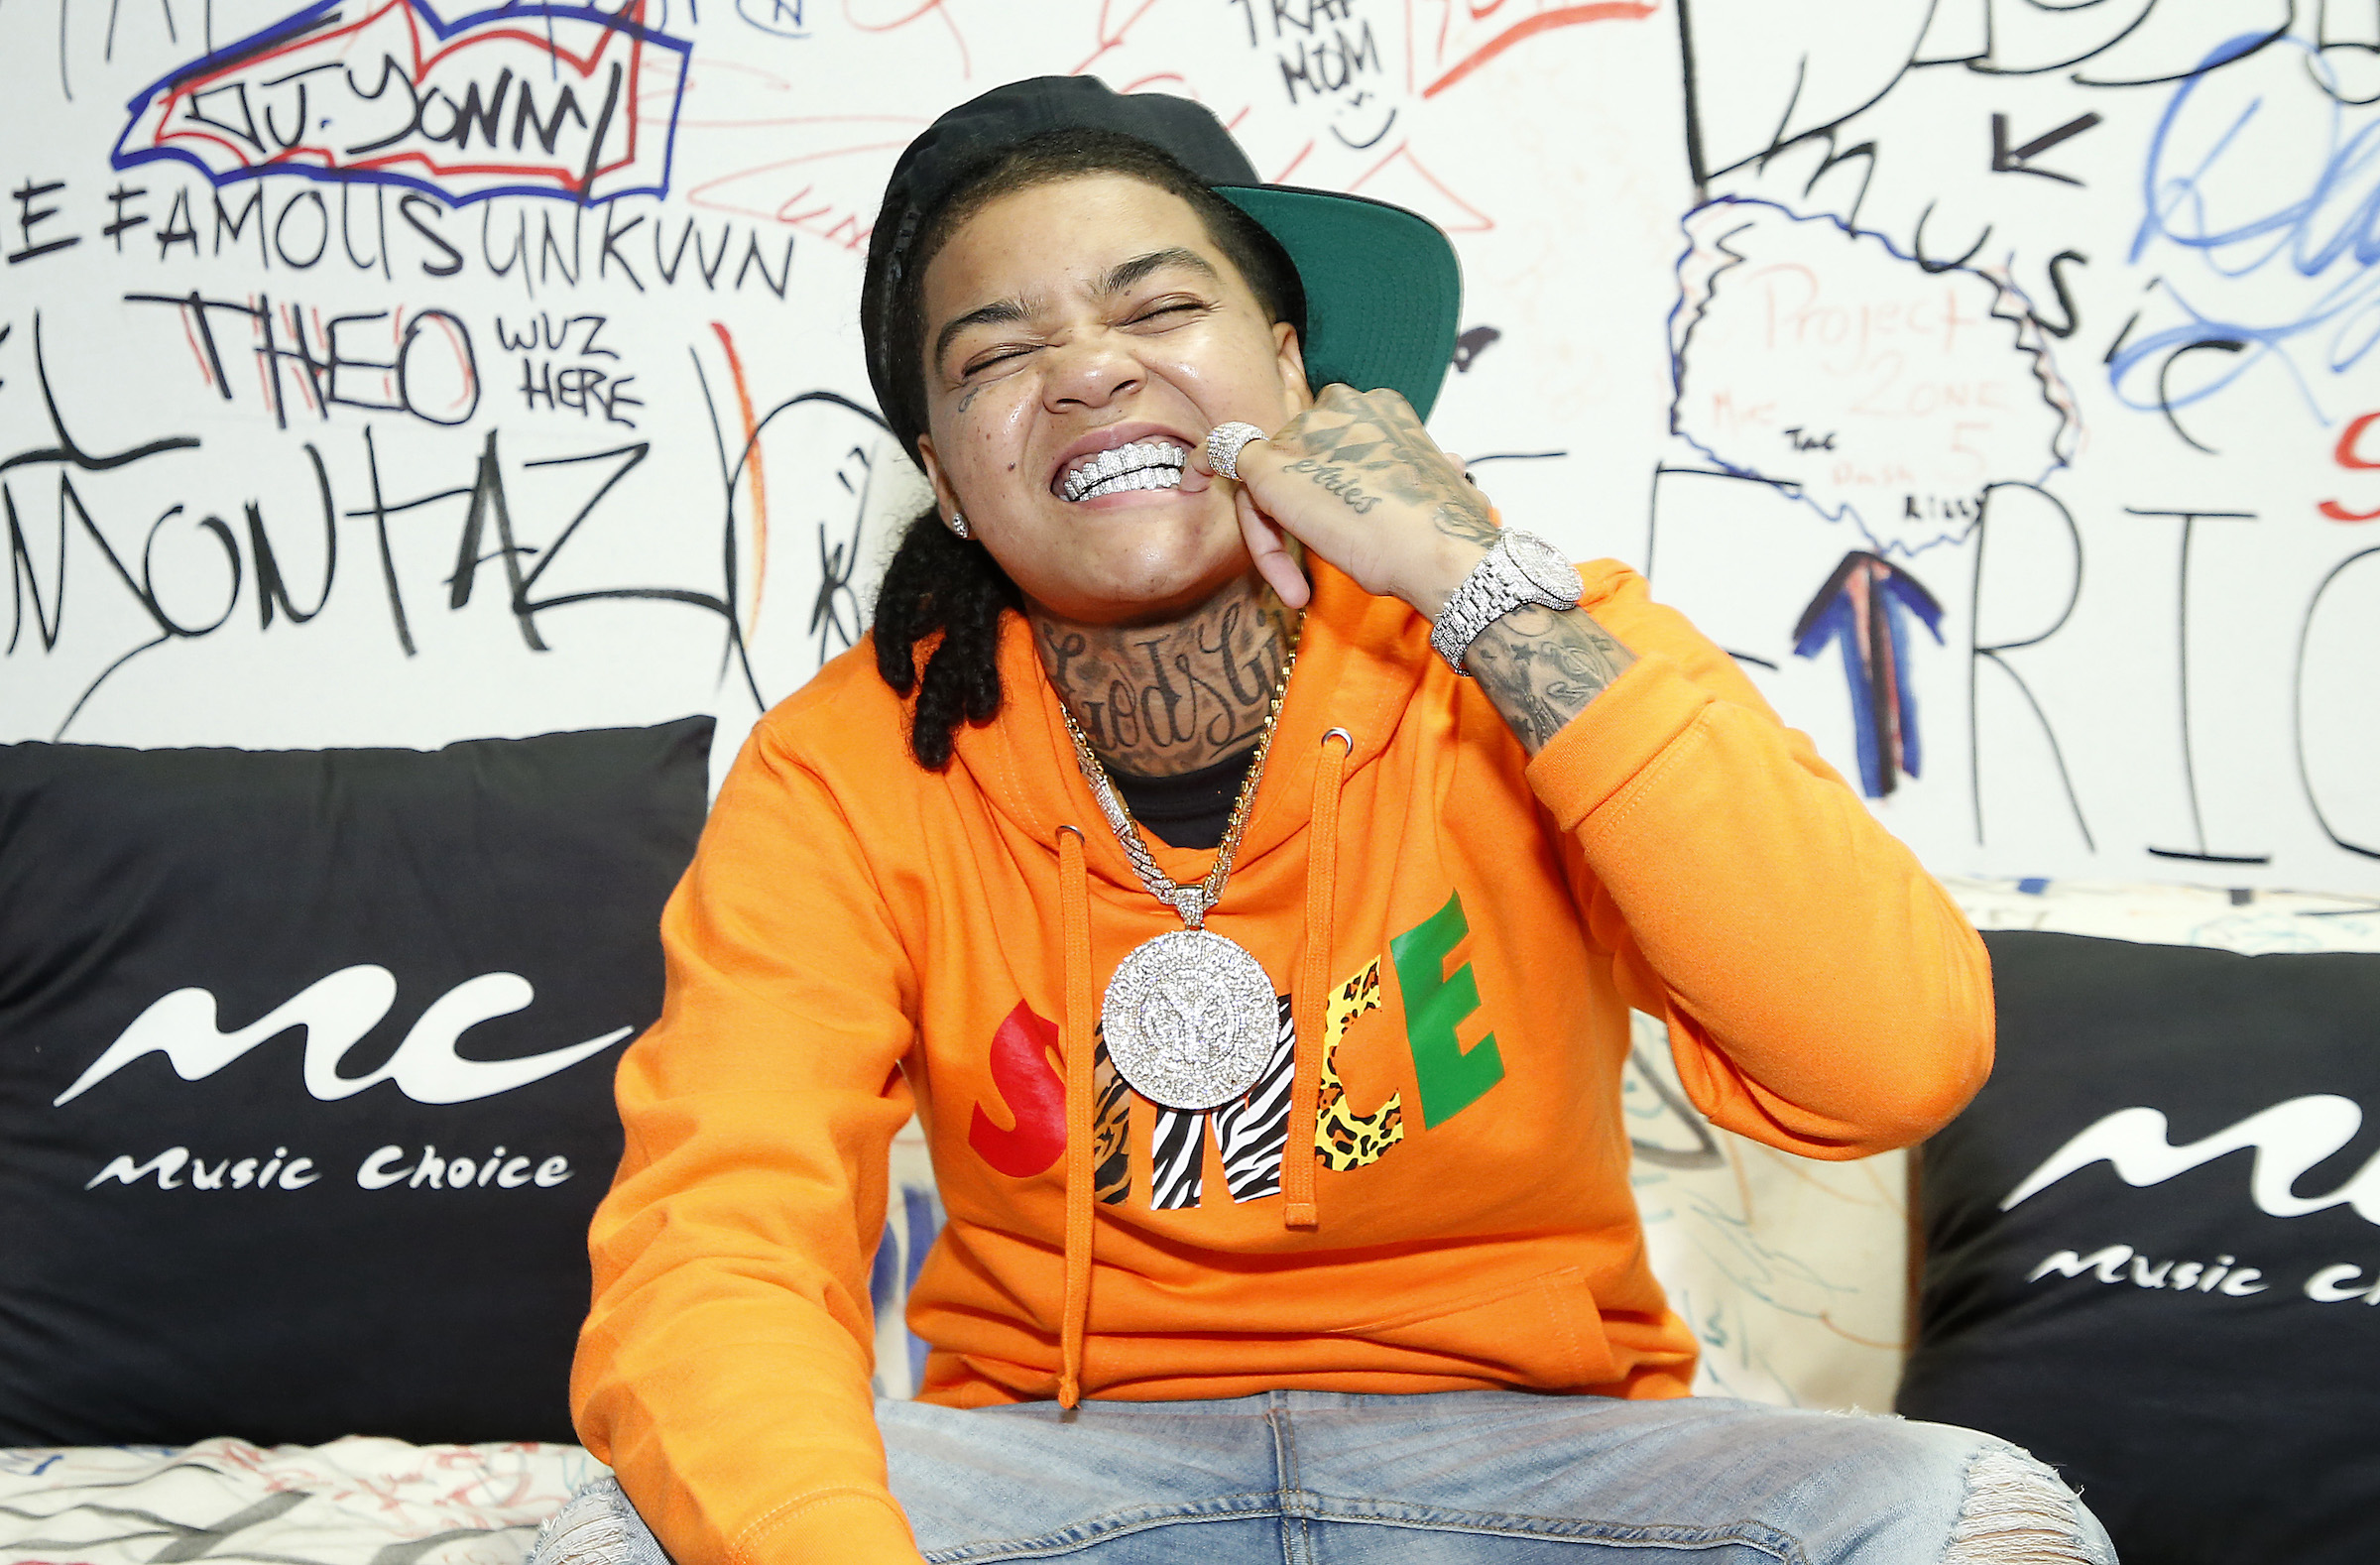 Young M.A at Music Choice smiling